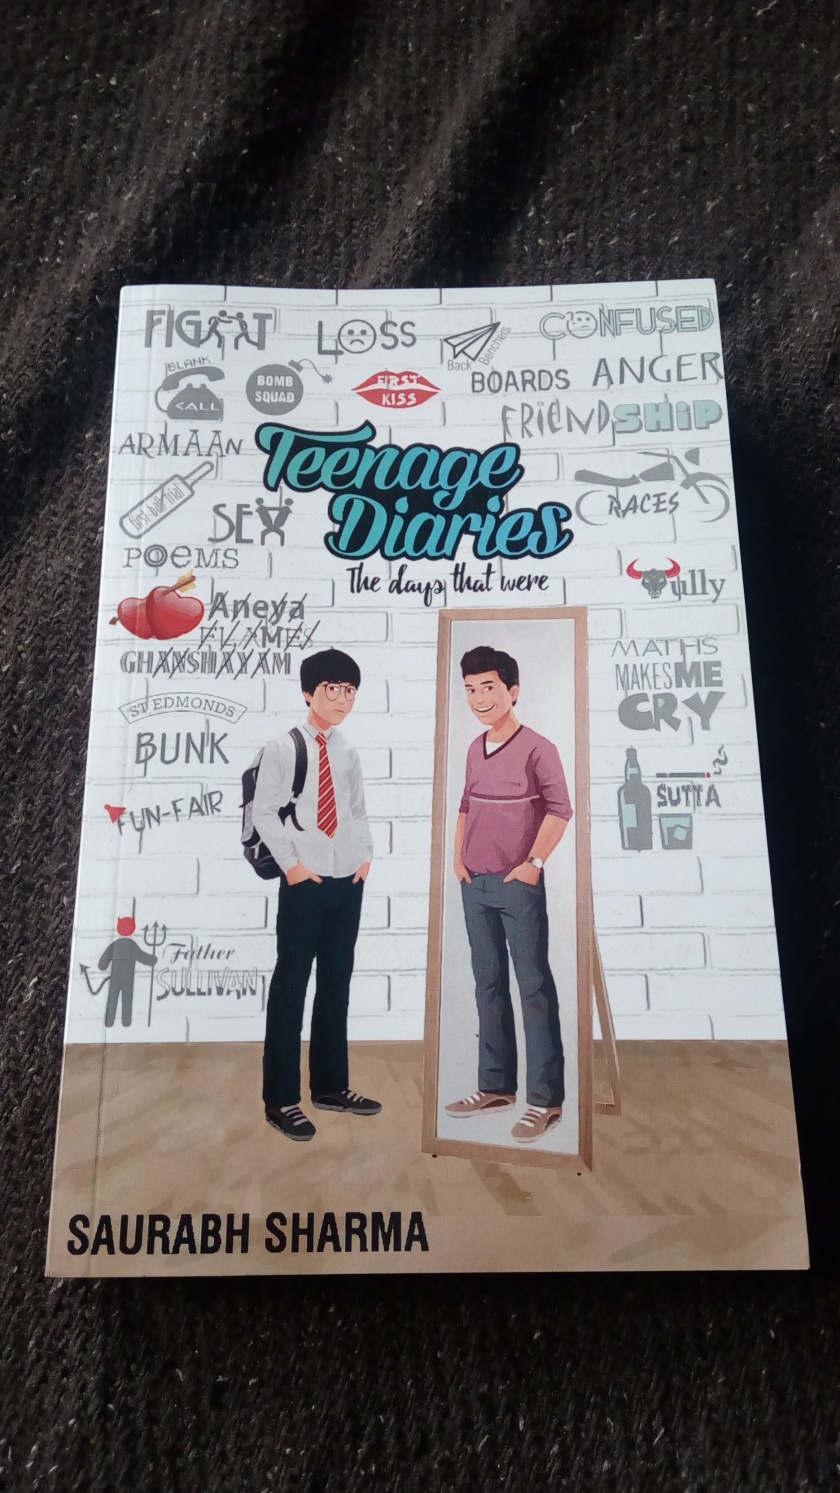 http://www.amazon.in/Teenage-Diaries-Days-That-Were/dp/9352017269